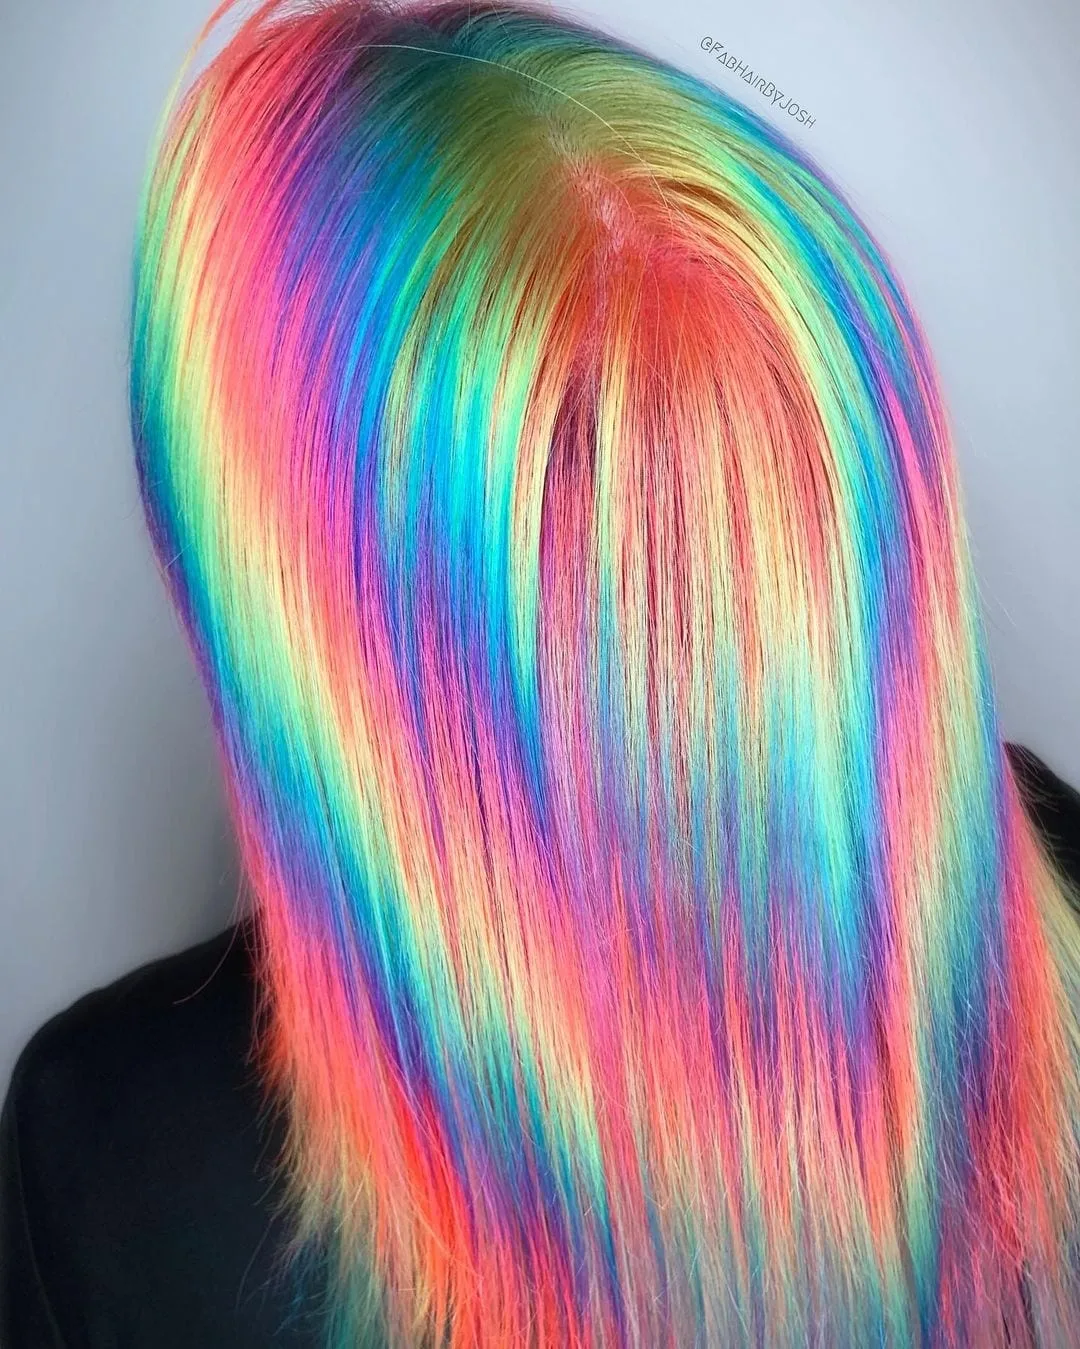 Crazy psychadelic holographic hairstyle on a woman with a cropped haircut that sits at her shoulders